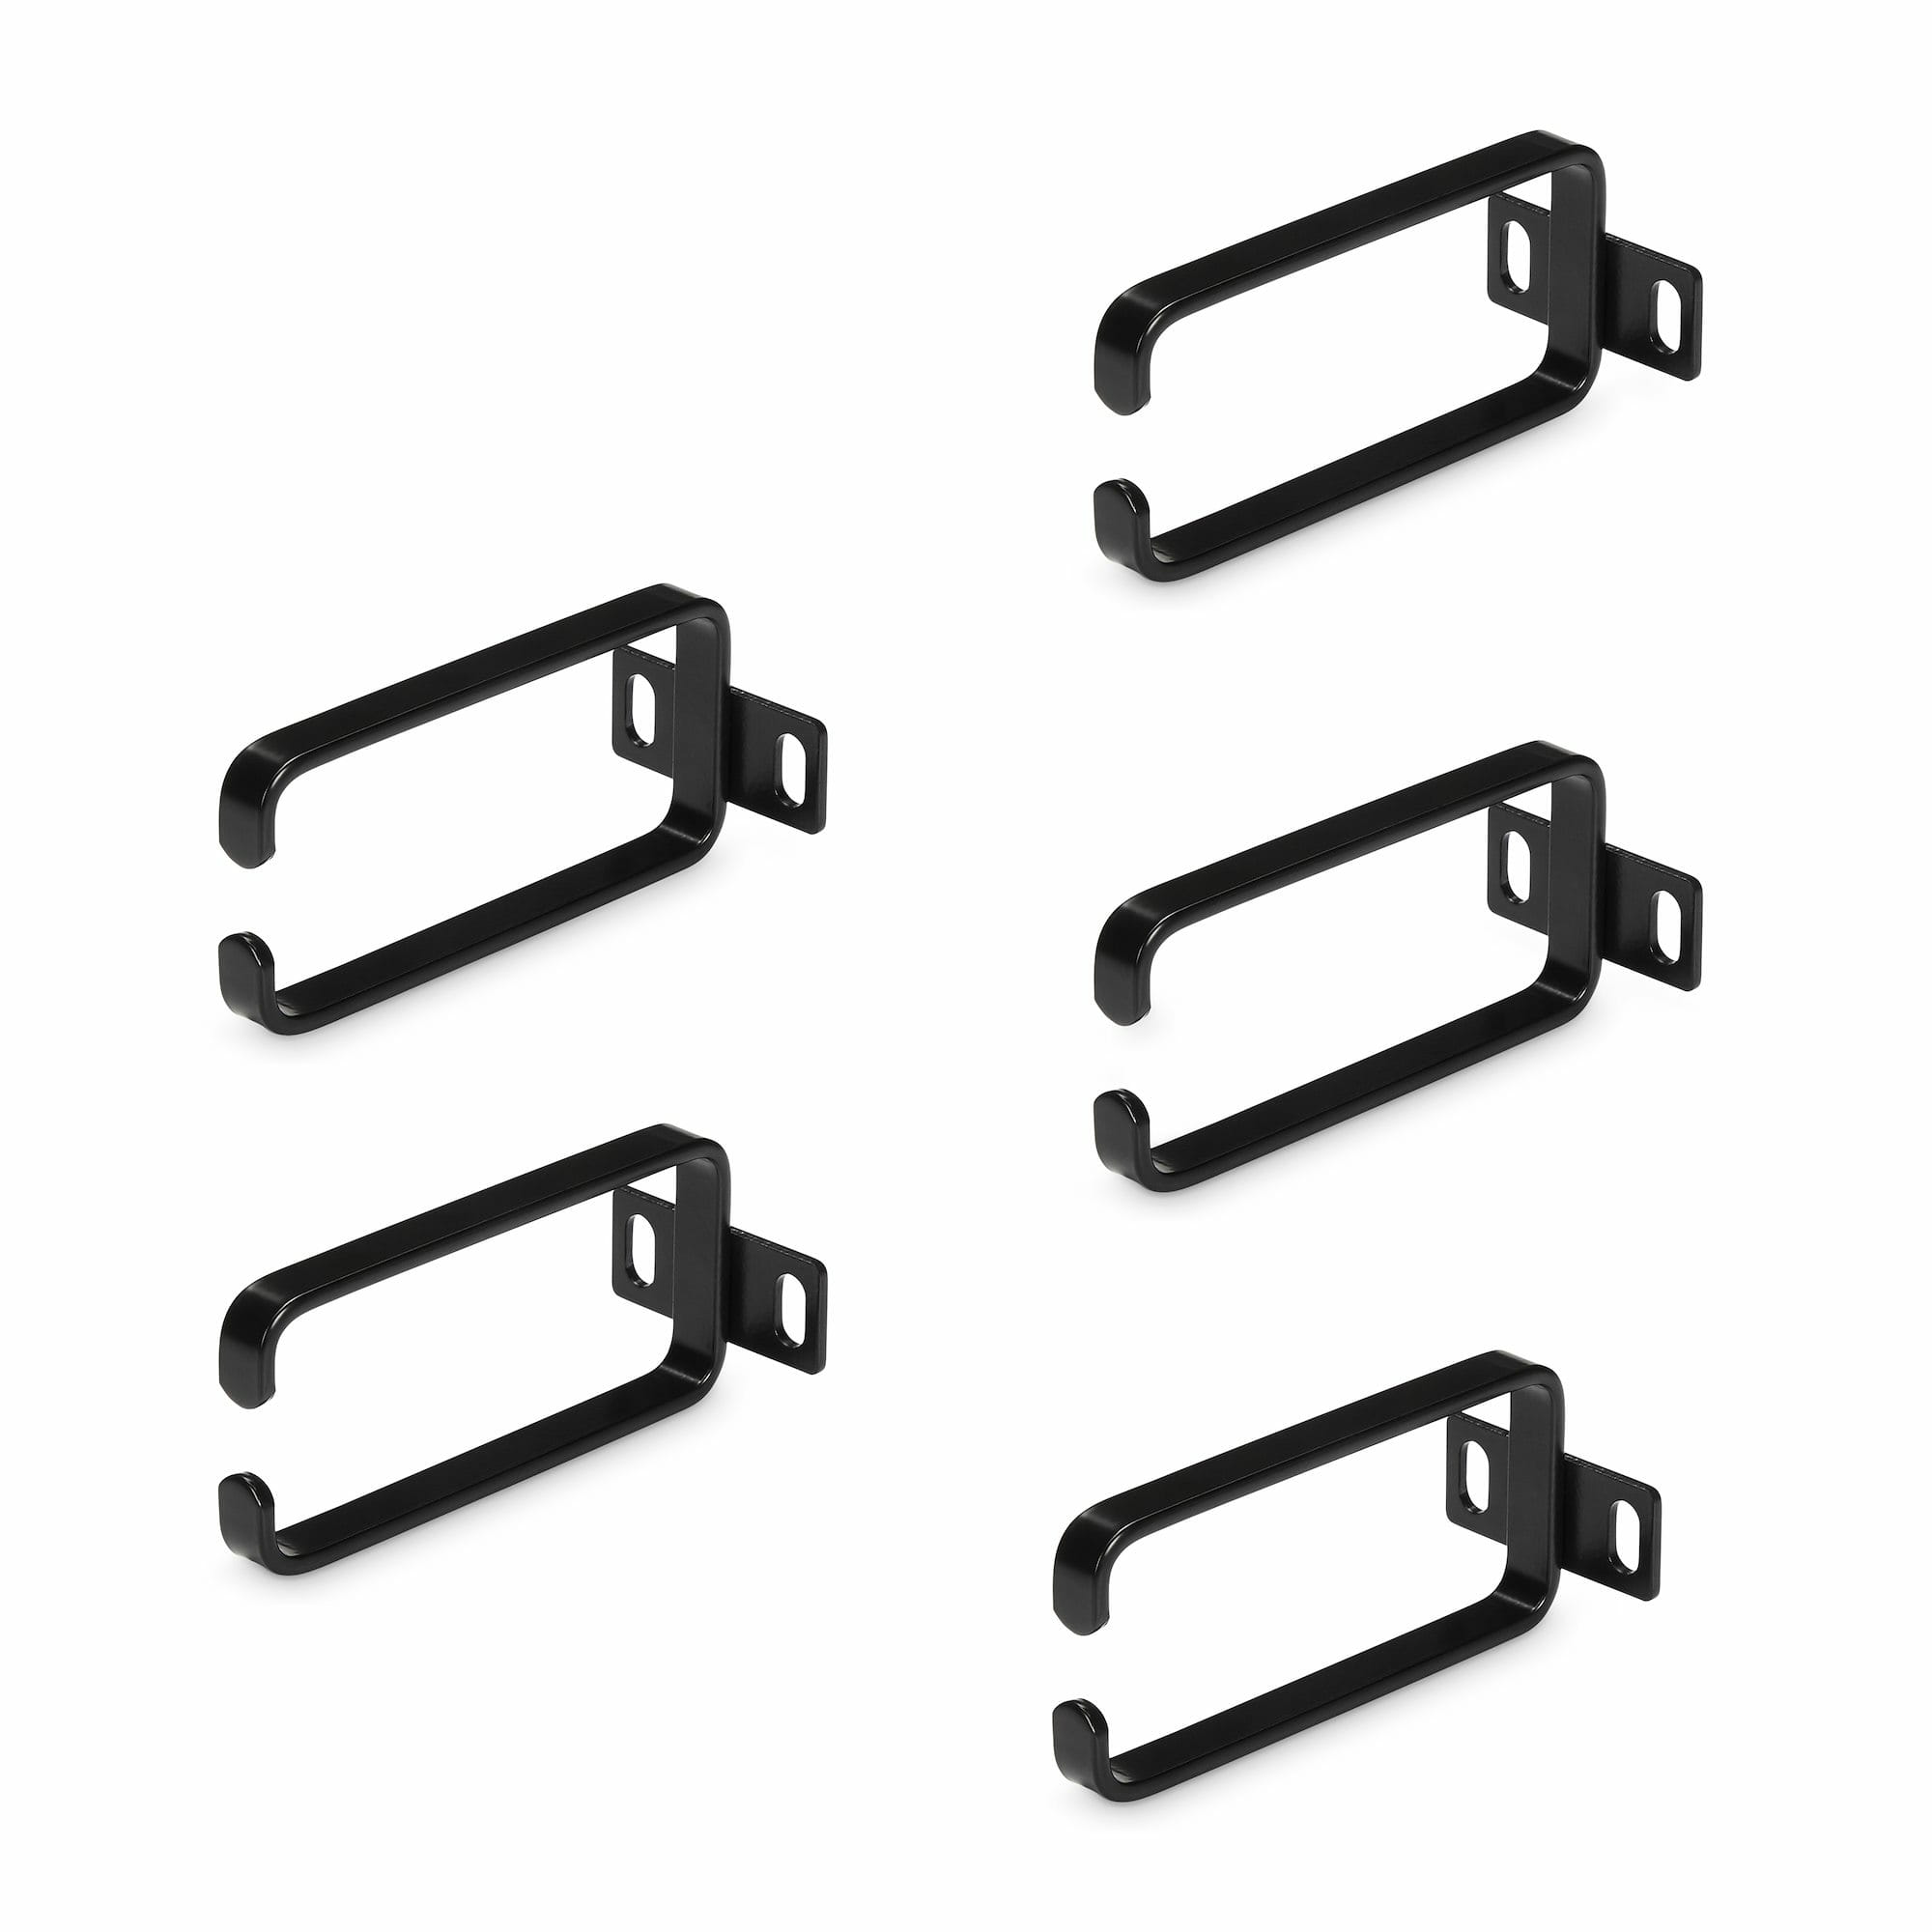 StarTech.com 5-Pack 1U Vertical Cable Management D-Ring Hooks, Cable Manager For 19" Server Racks/Cabinets, Network Rack Wire Organizers, Cable Guide Rings - Kabelmanagementring (vertikal)